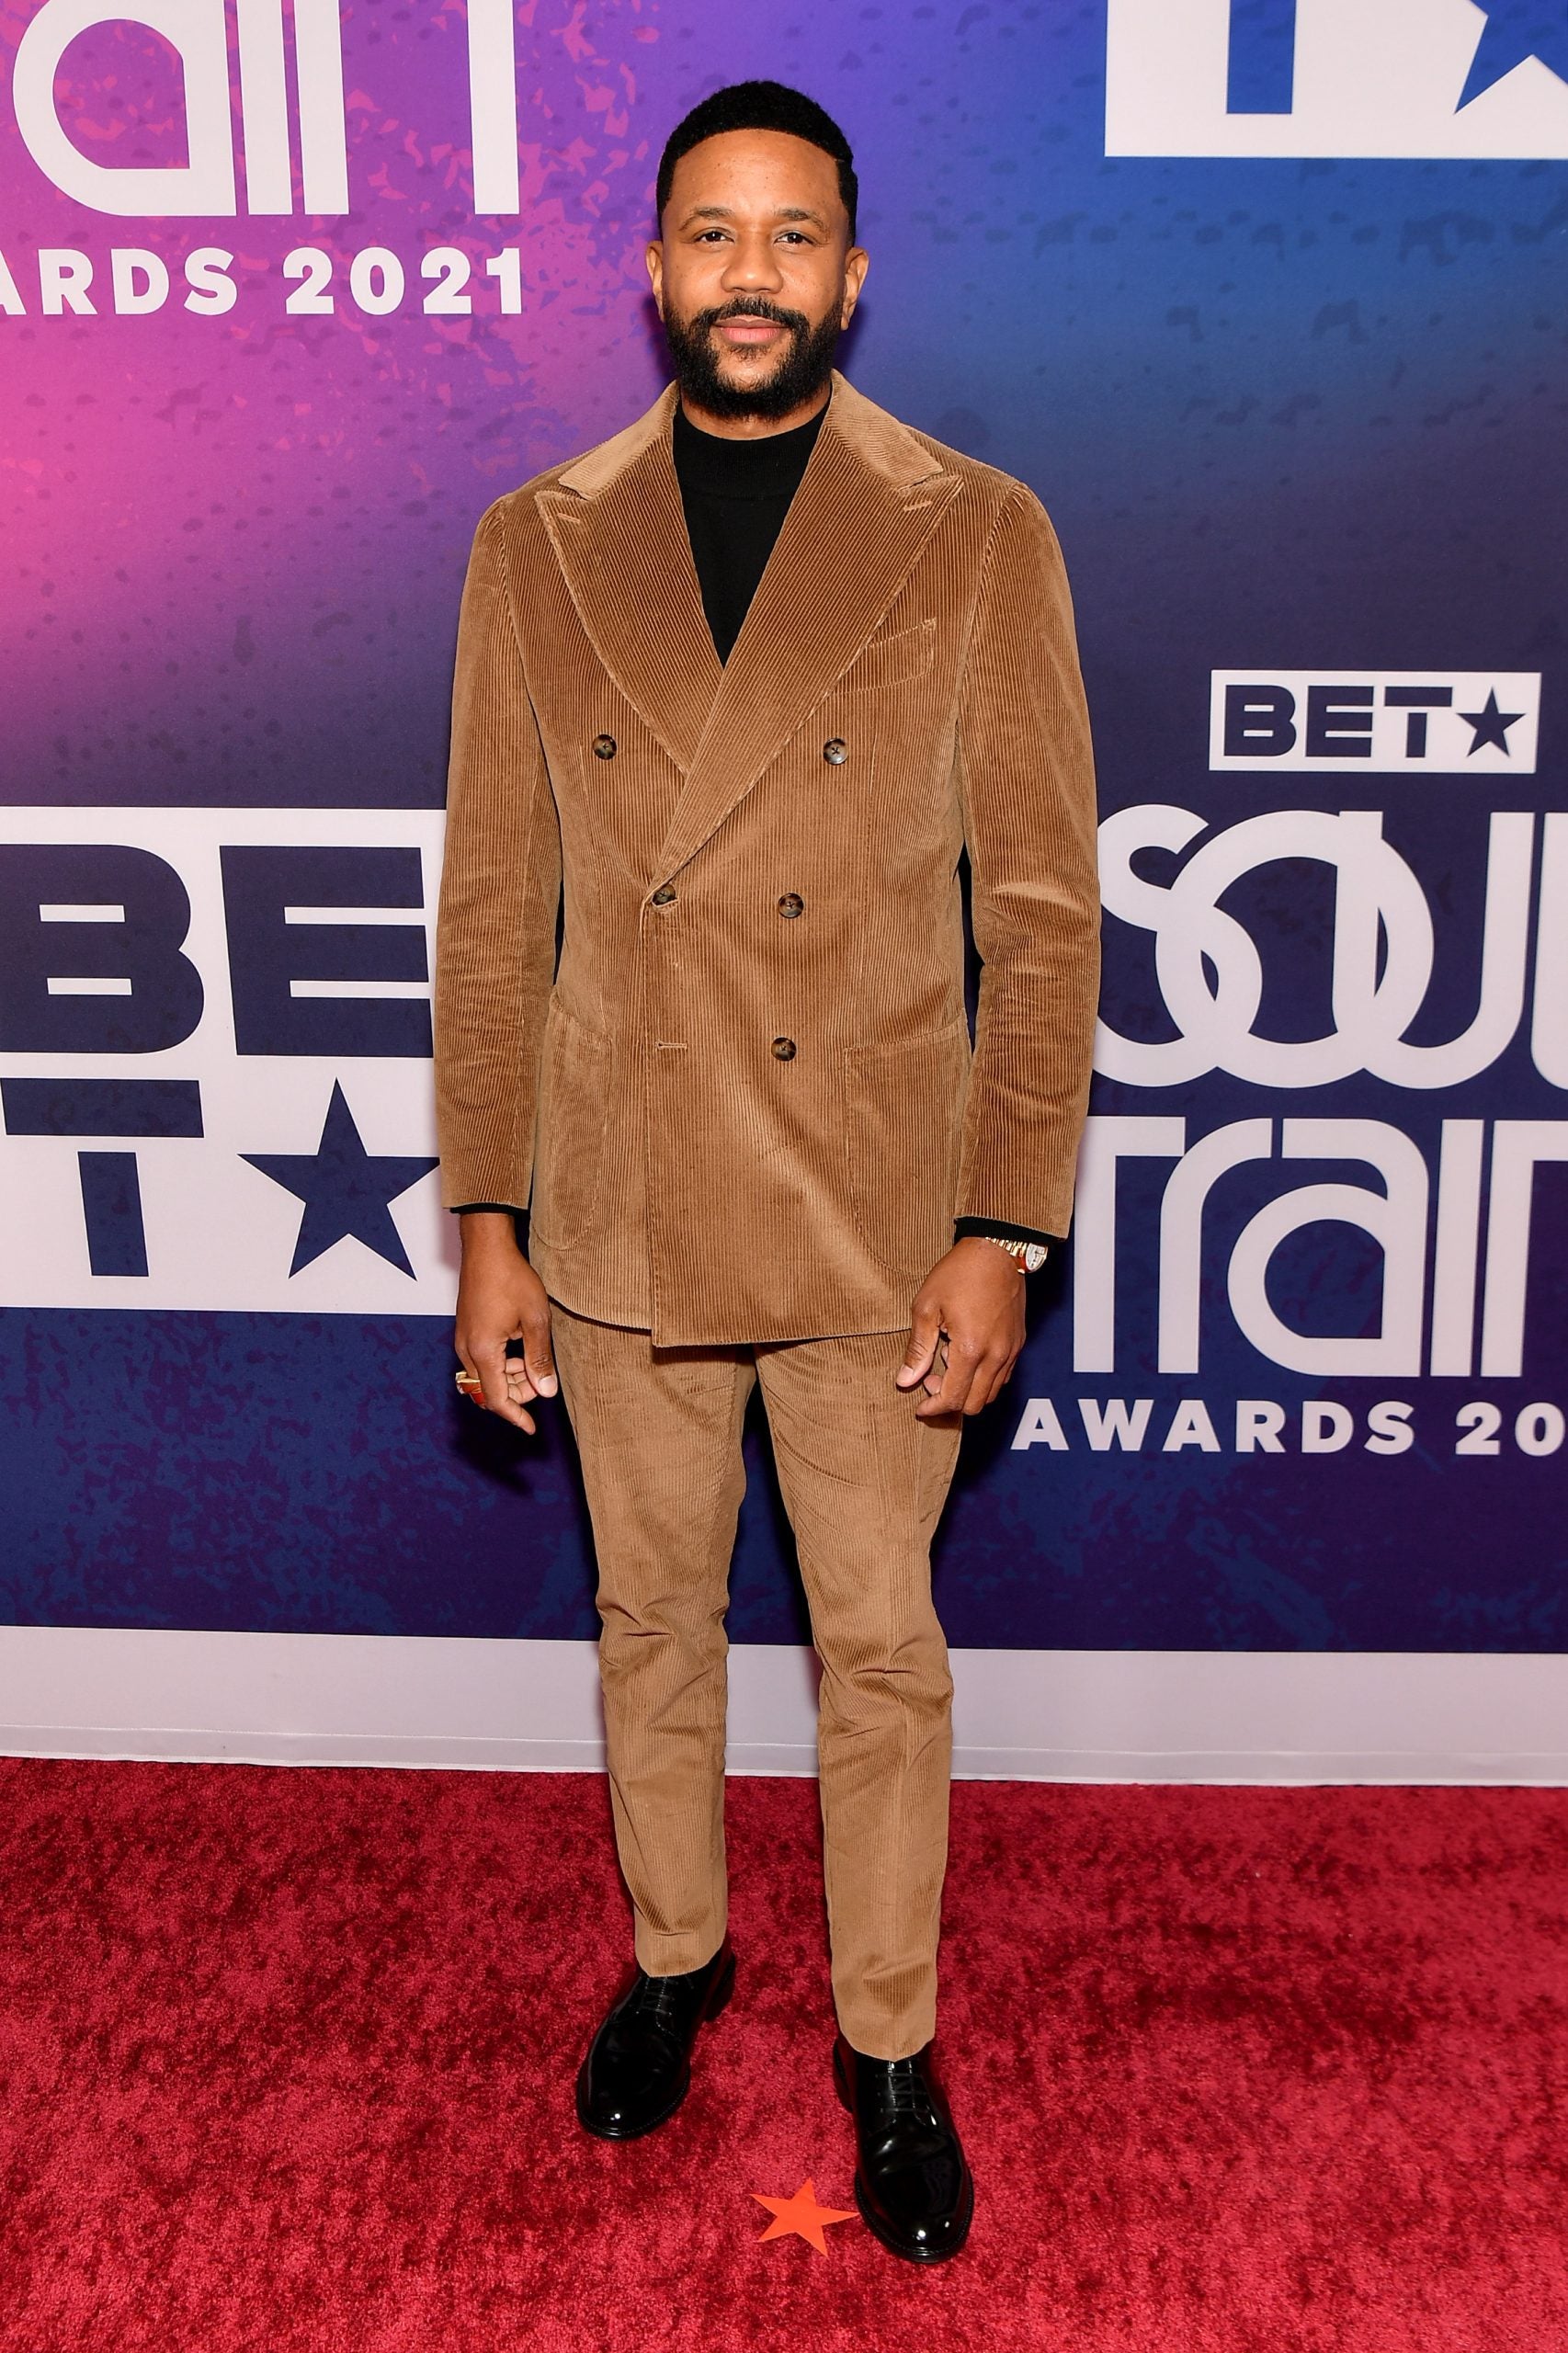 Soul Train Awards 2021: See The Celebs Who Hit The Red Carpet In Harlem